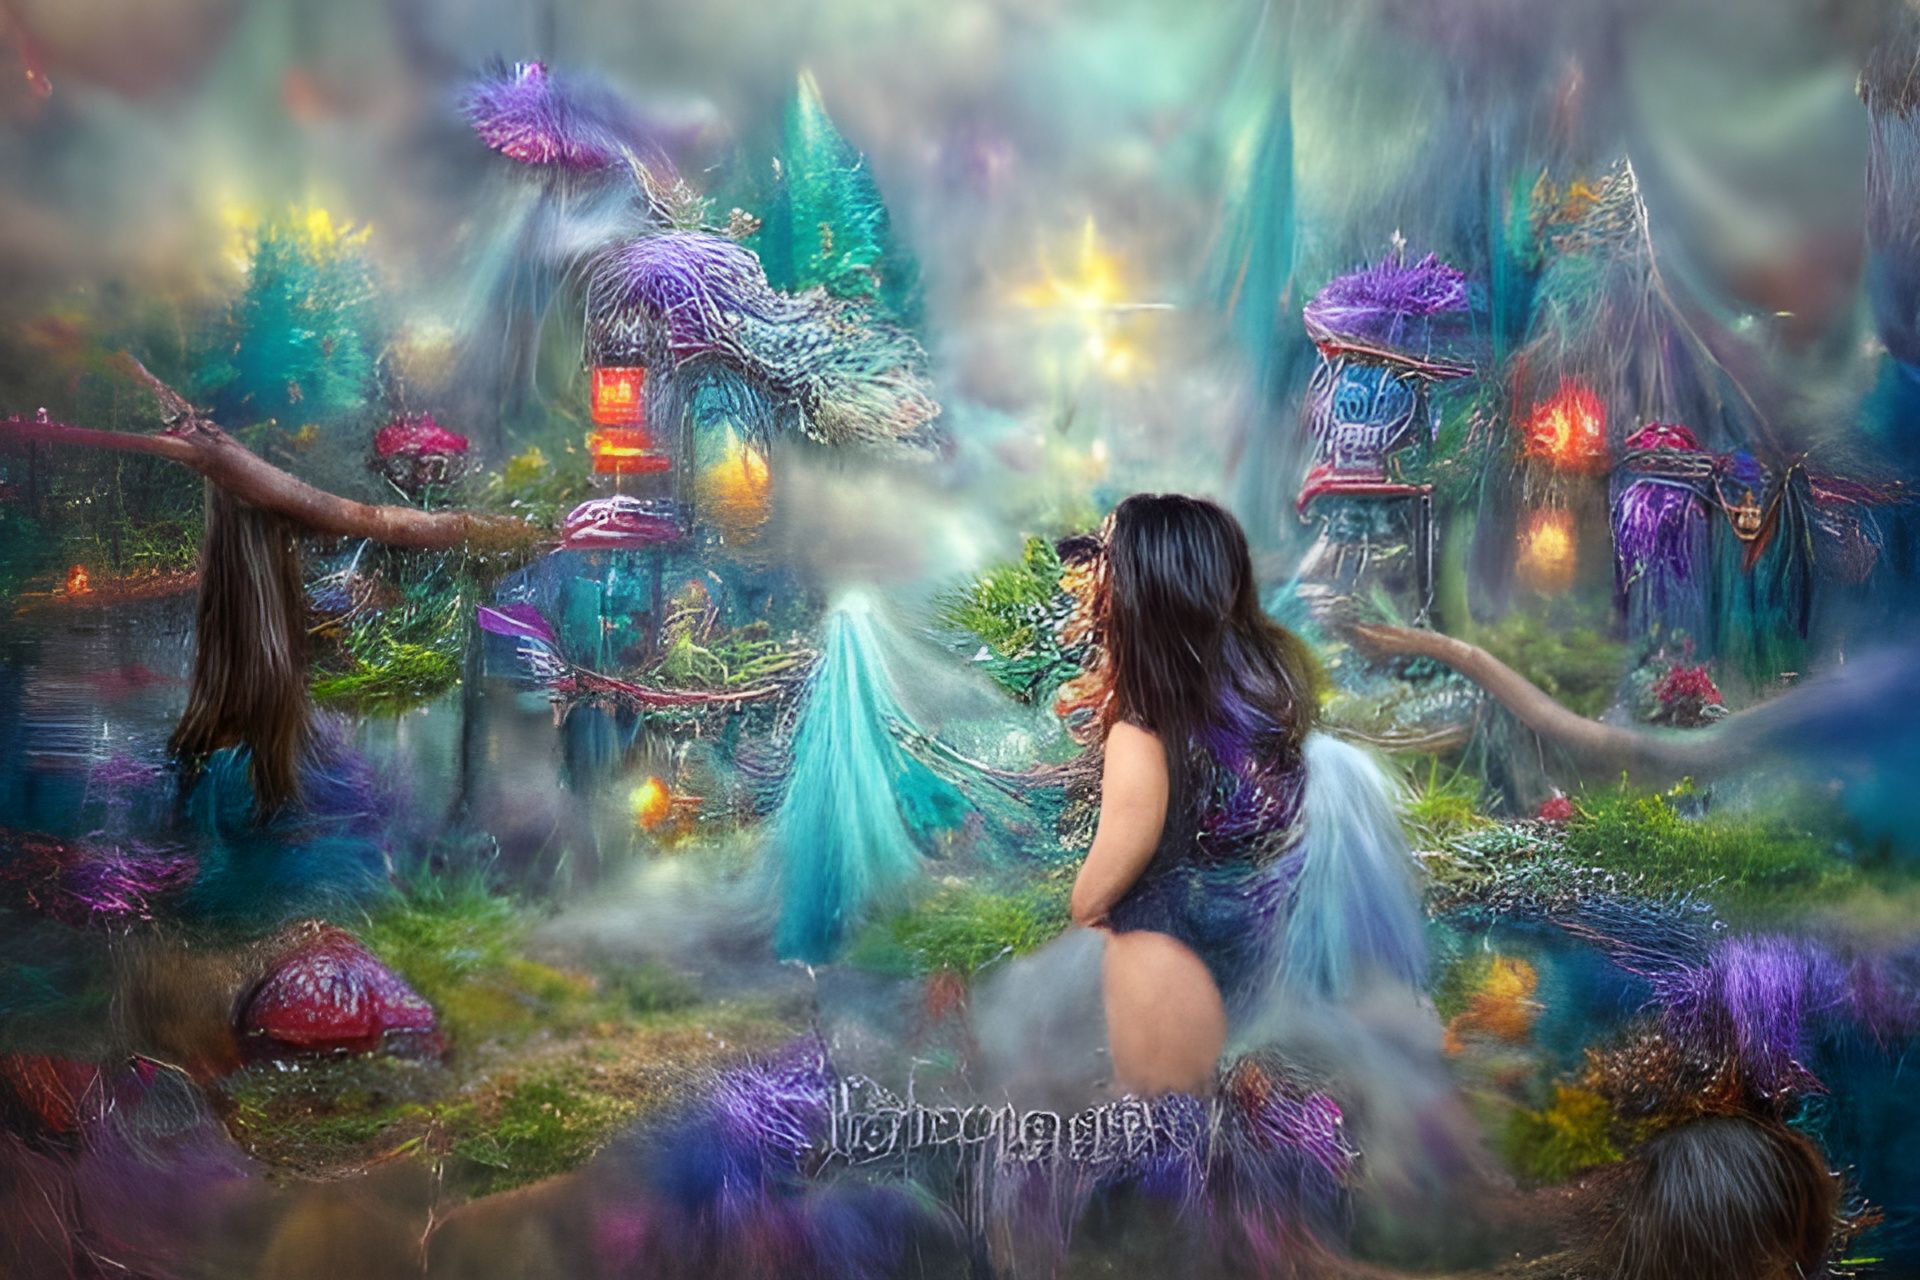 In a dark, enchanted forest, a young woman stands amidst ethereal lights  casting ghostly glows, with a sky of brooding clouds and shimmering - AI  Generated Artwork - NightCafe Creator